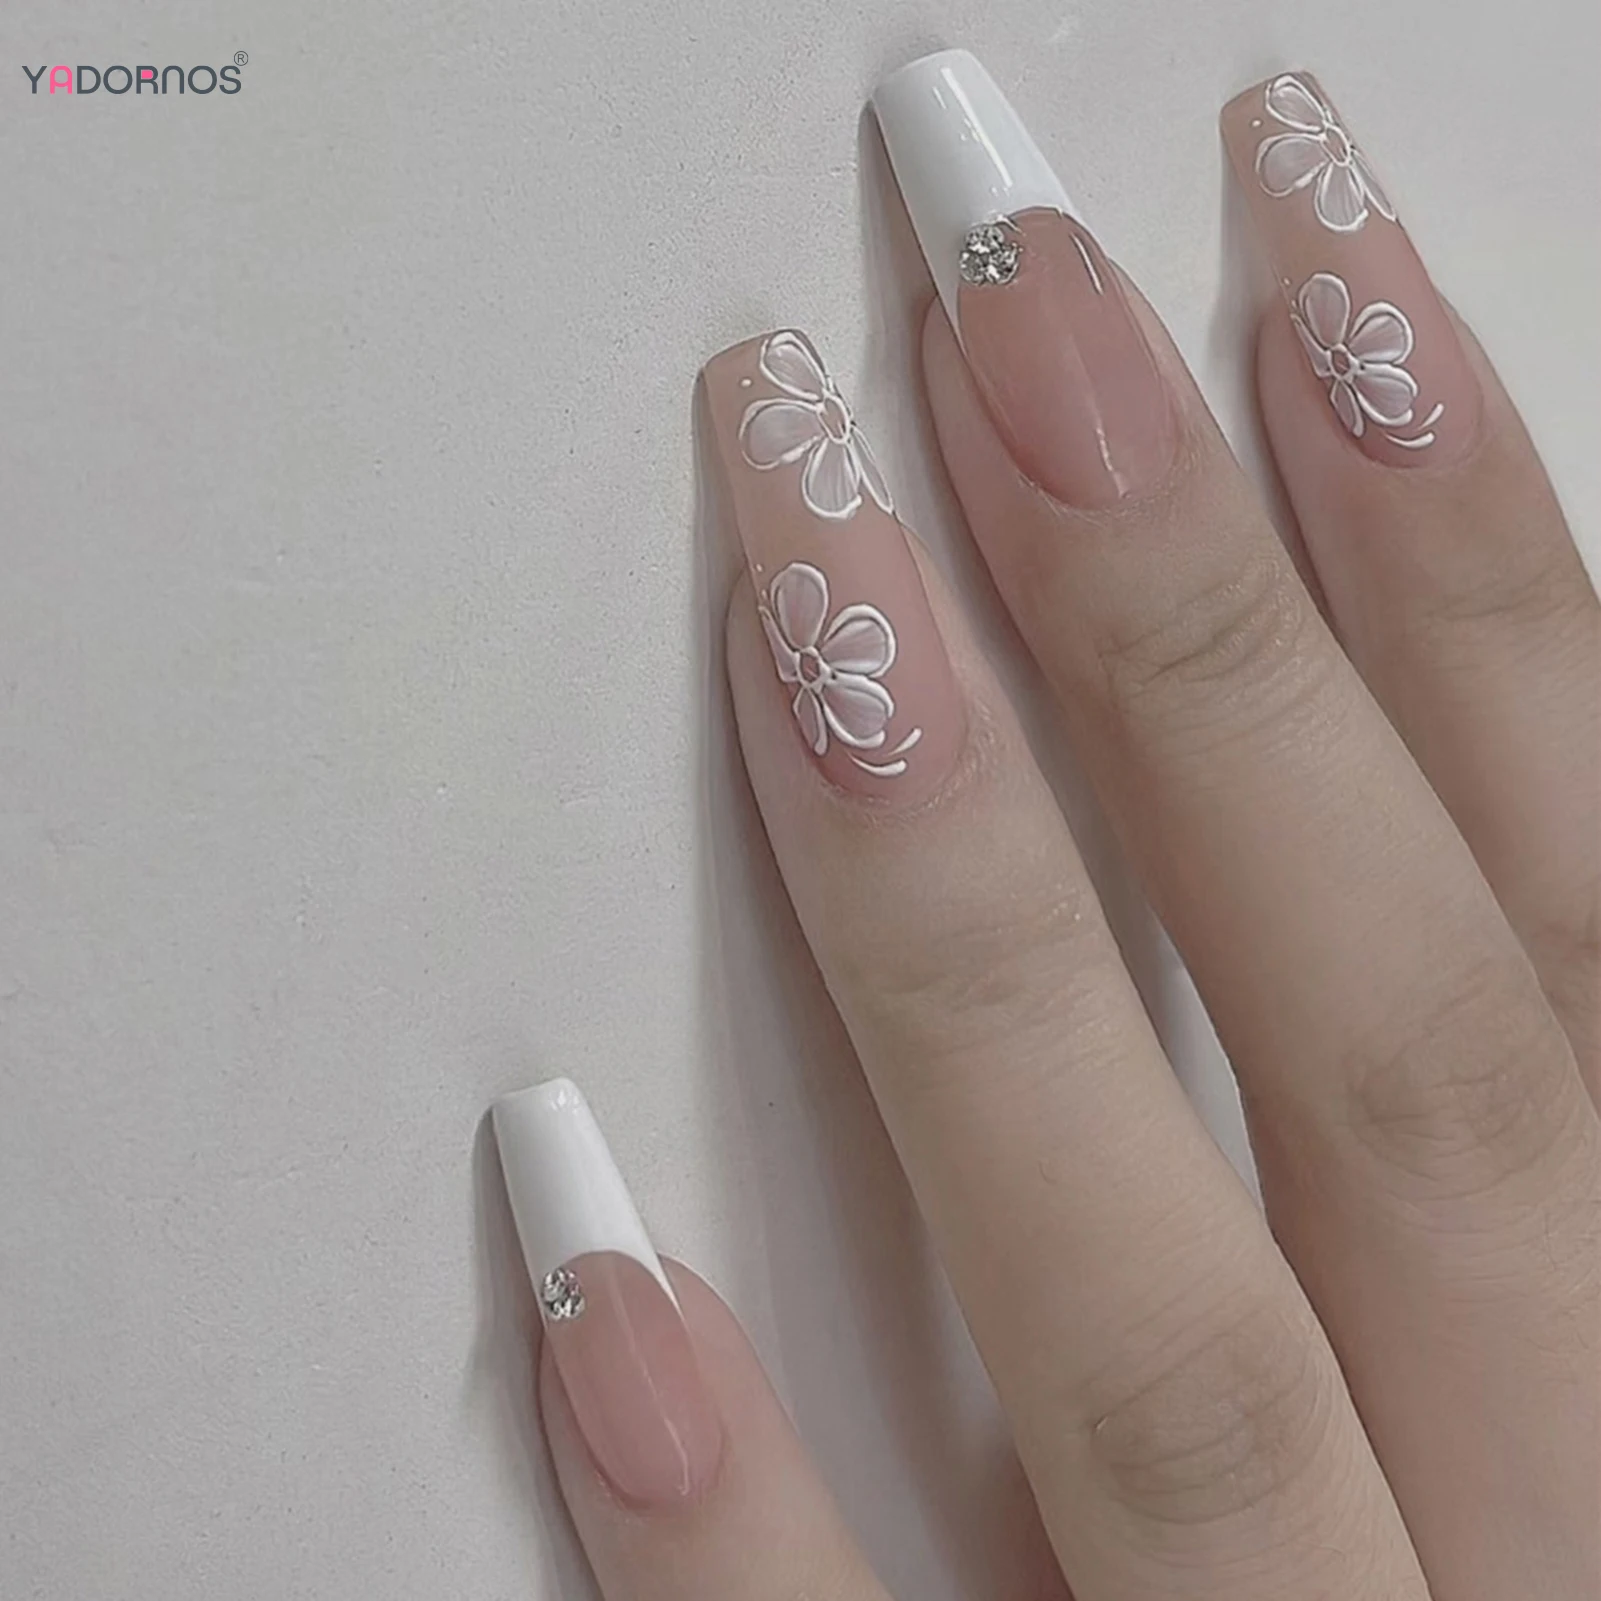 

White French Press on Nails Flower Diamond Designs Long Coffin Nude Color False Nails Ballerina Wearable Fake Nails for Women